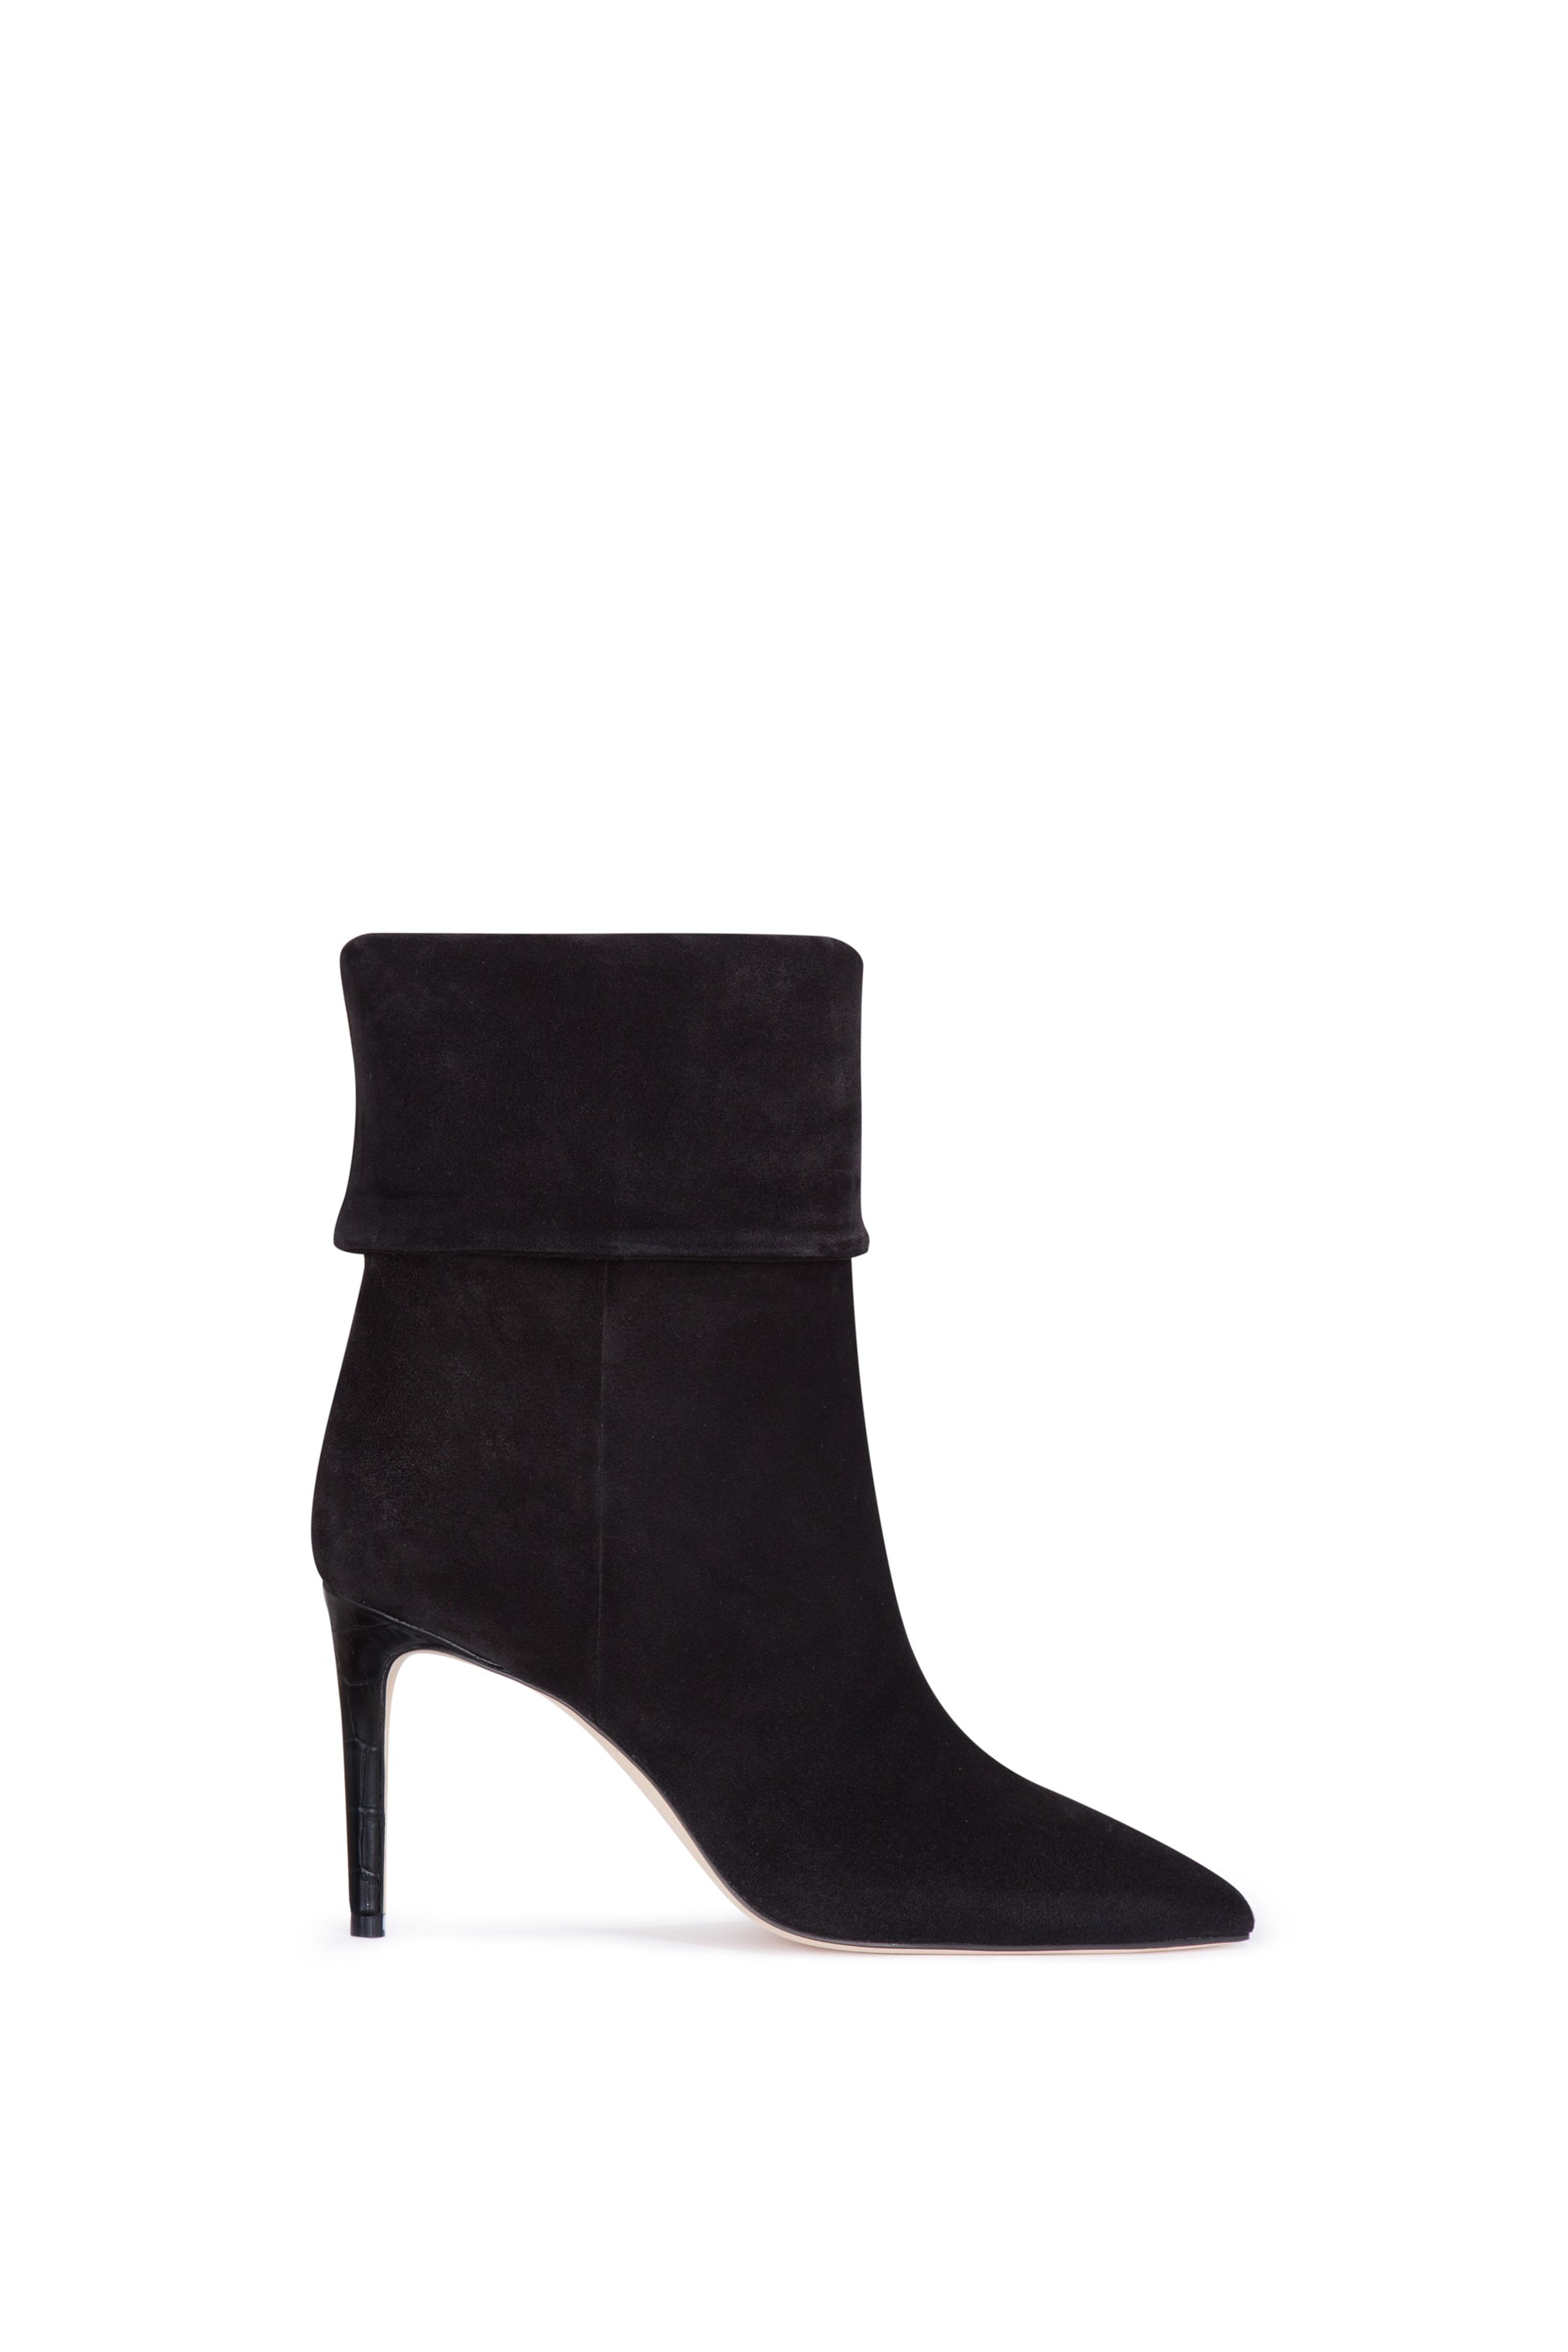 Black calf suede ankle boots with turn-down collar - Main side